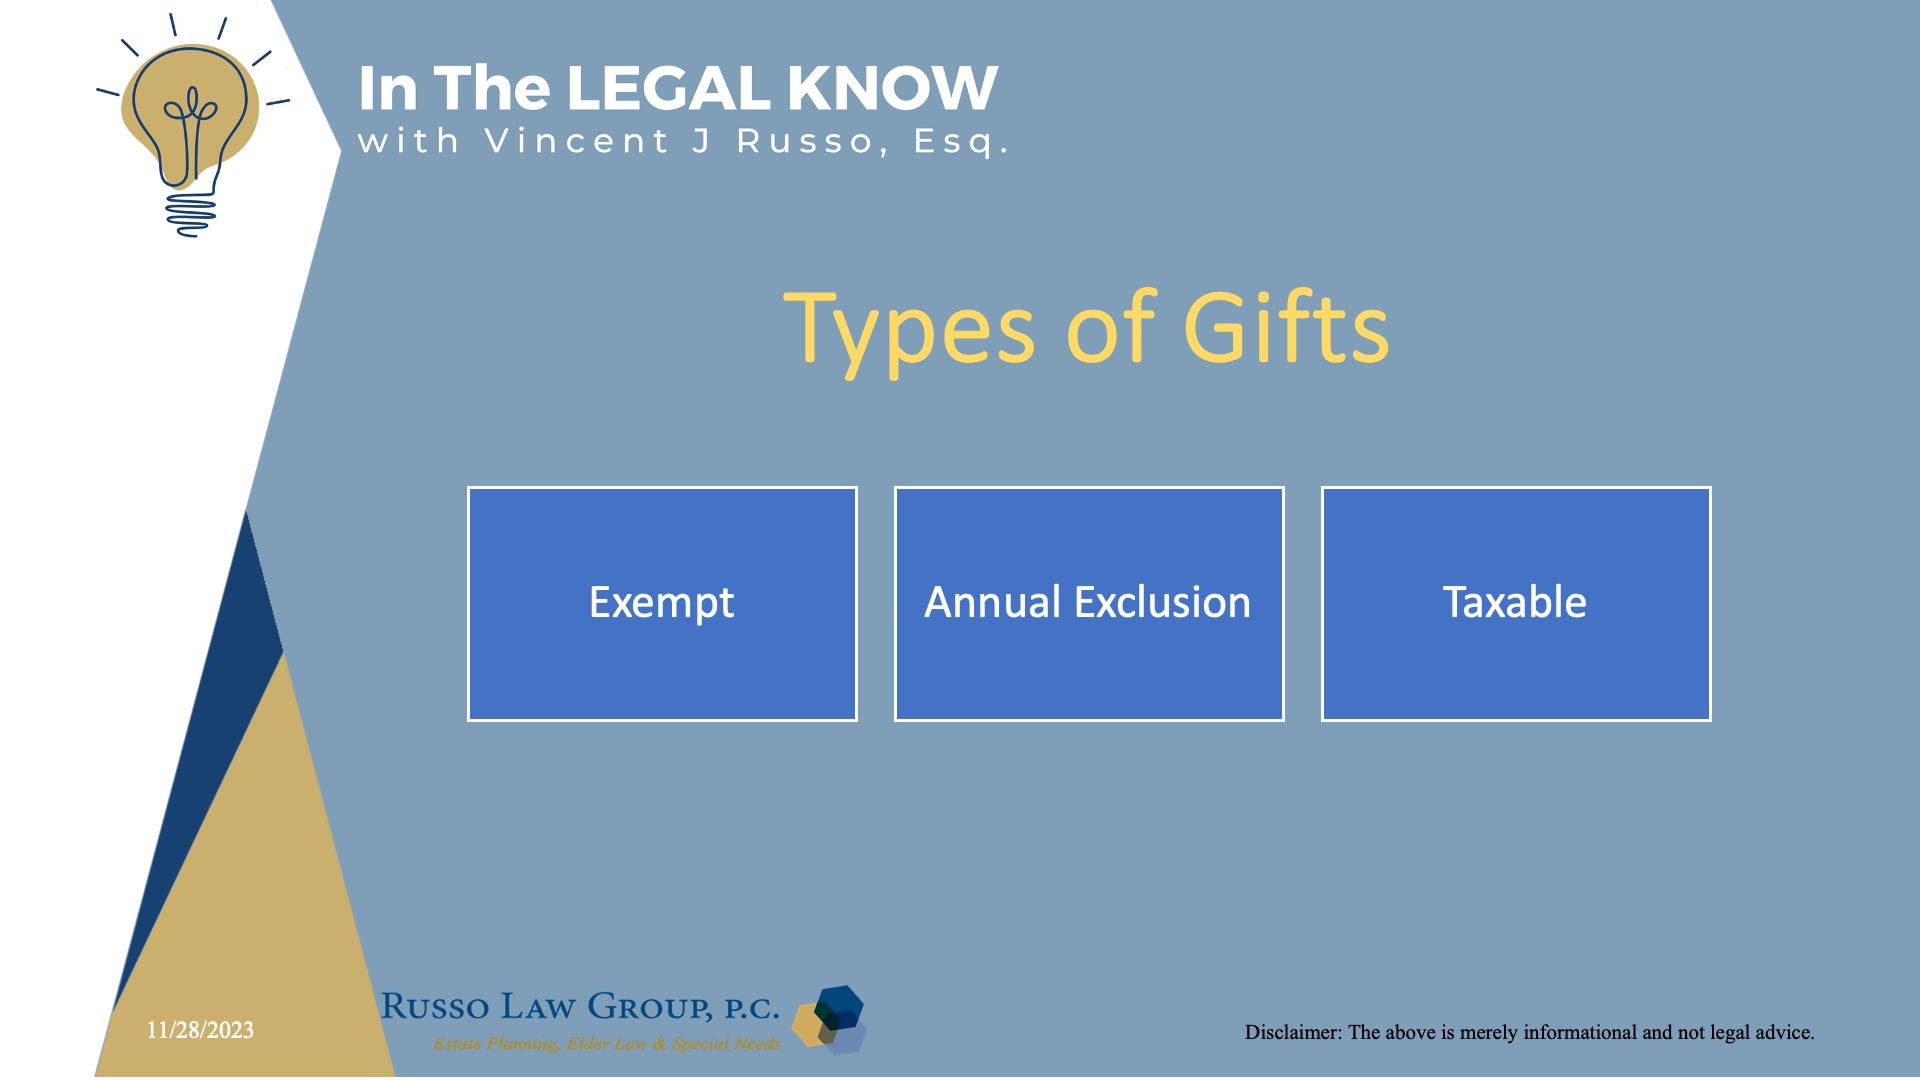 Types of Gifts